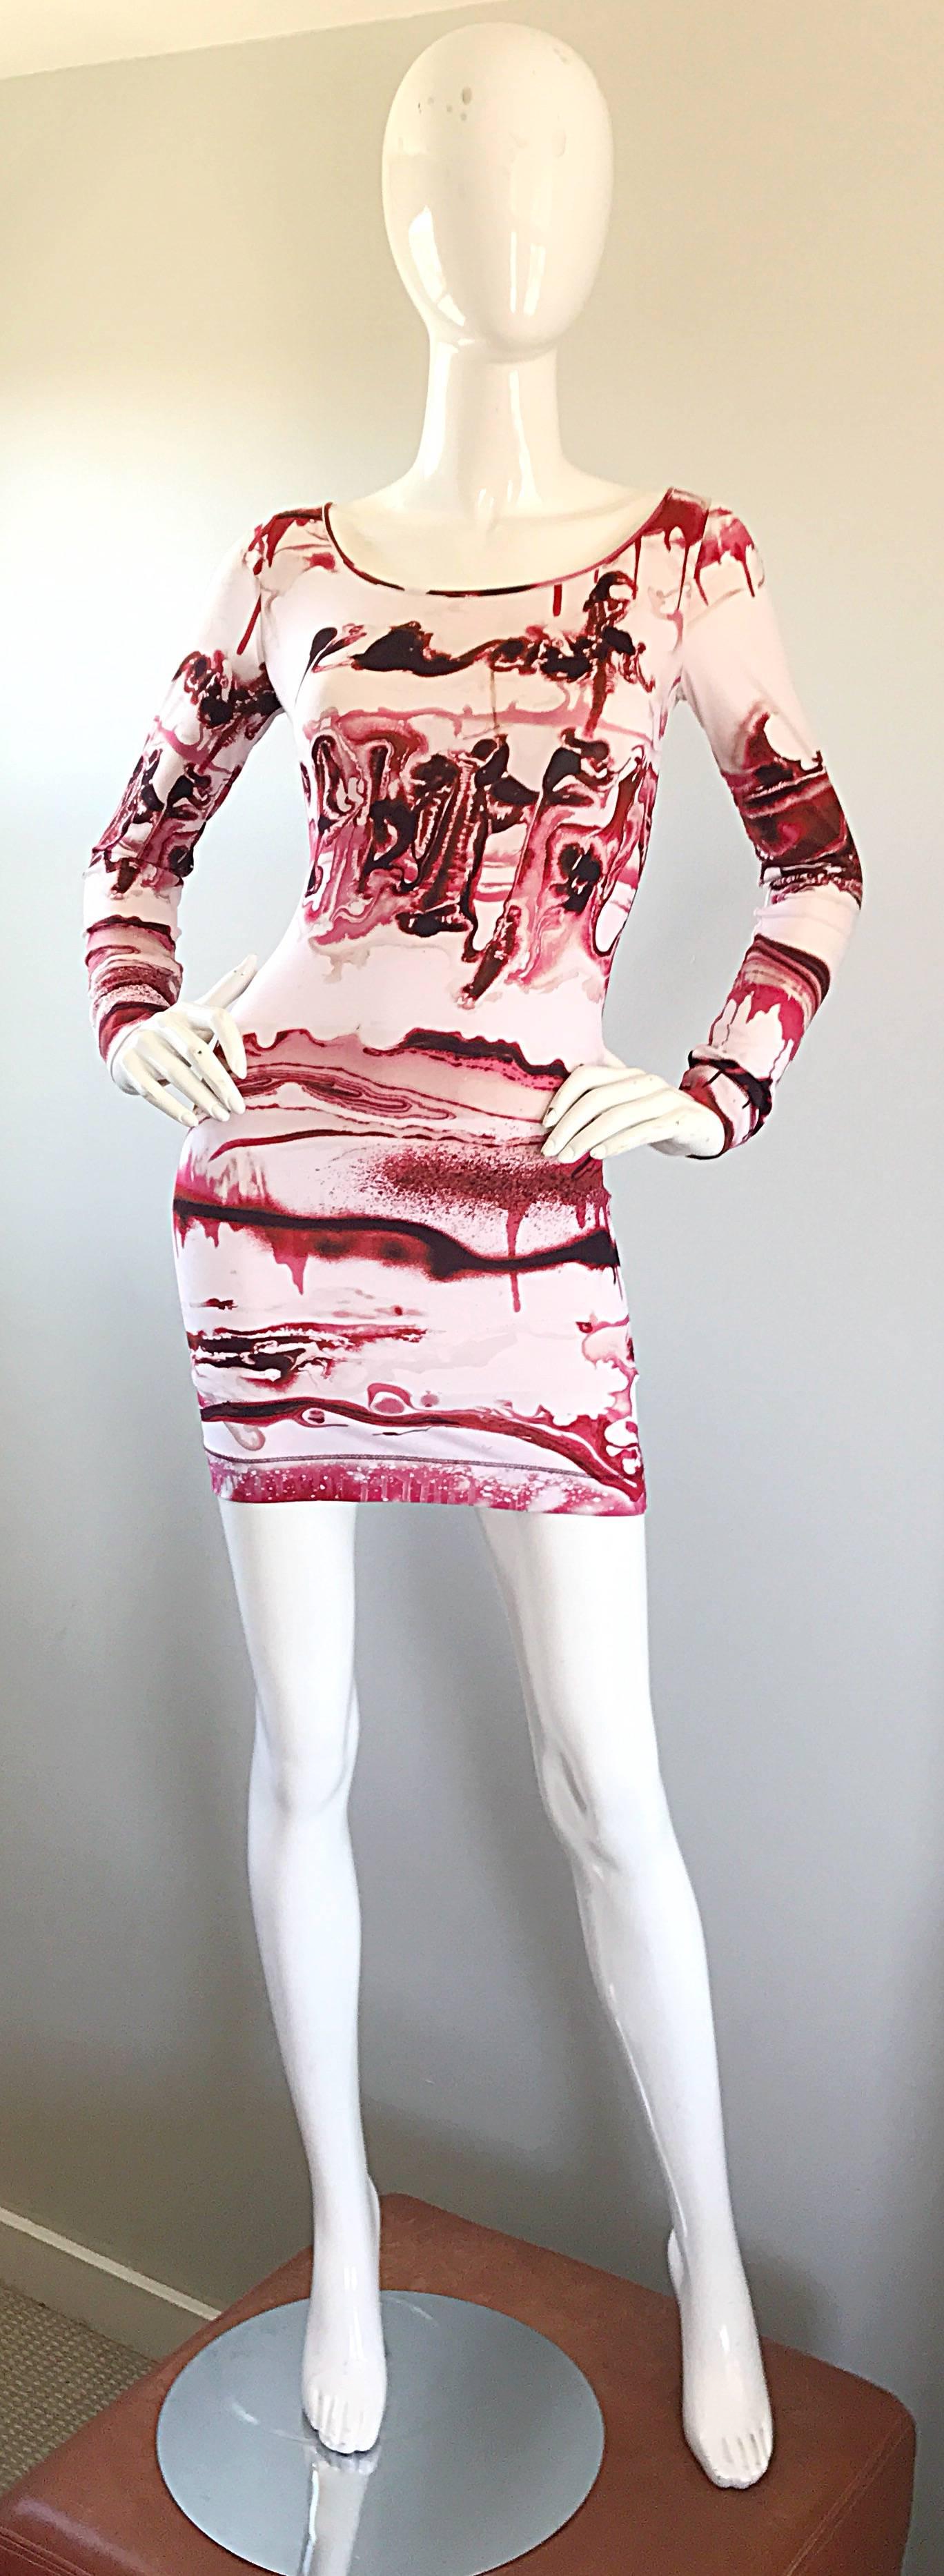 Rare vintage early 2000s JEAN PAUL GAULTIER vampire / blood theme graffiti mini dress. Super sought after print collection. Stretch rayon jersey will stretch to fit. Great belted or alone, with heels or boots. In great condition.
Made in